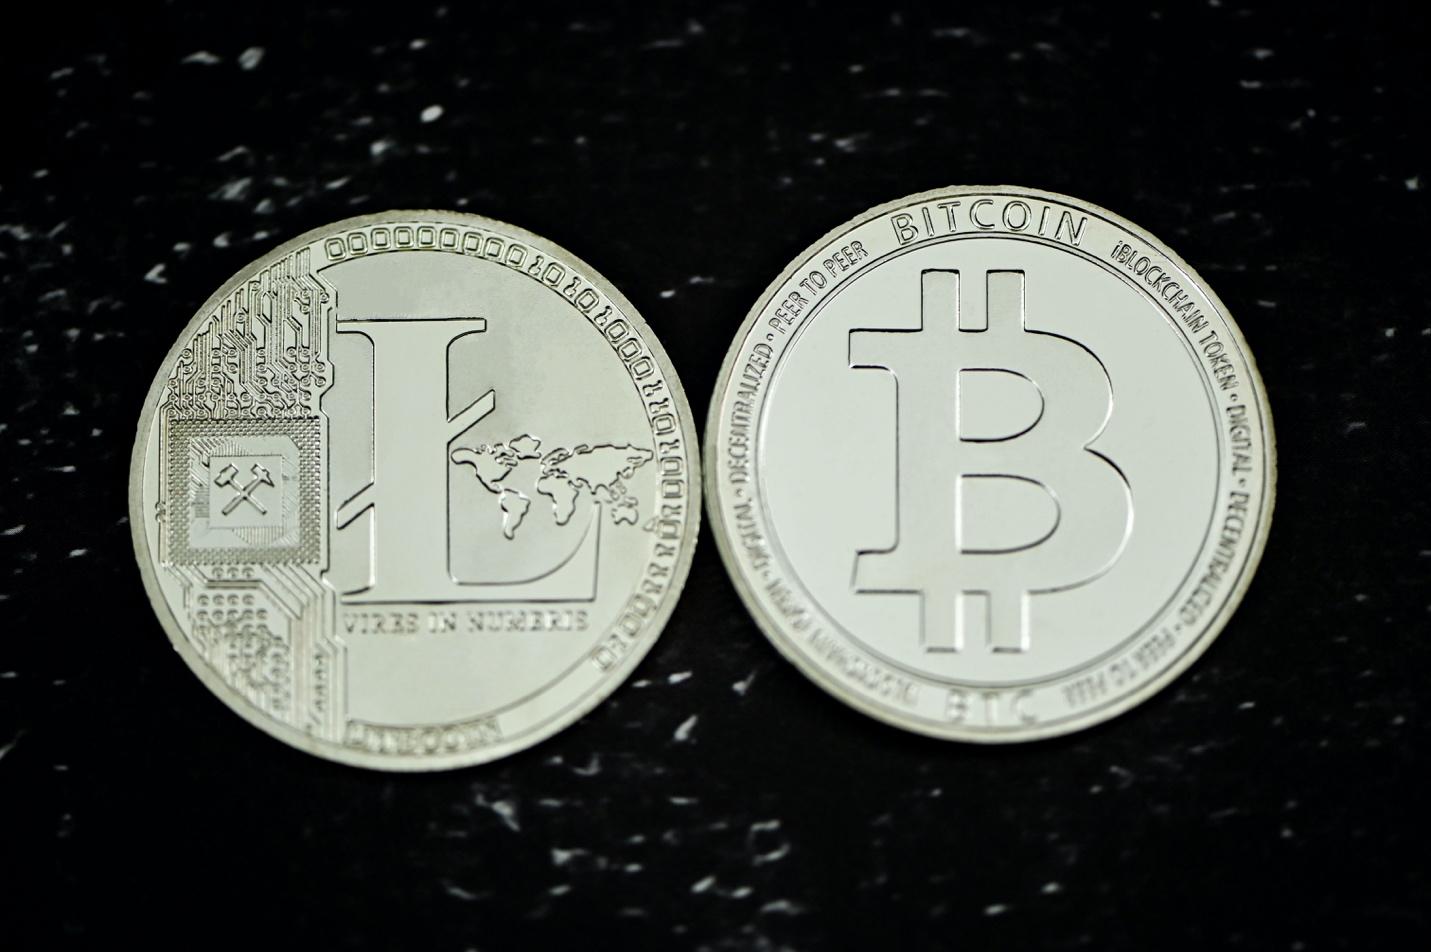 buy bitcoin - Bitcoin versus Litecoin: What are the differences between these two giant cryptocurrencies?